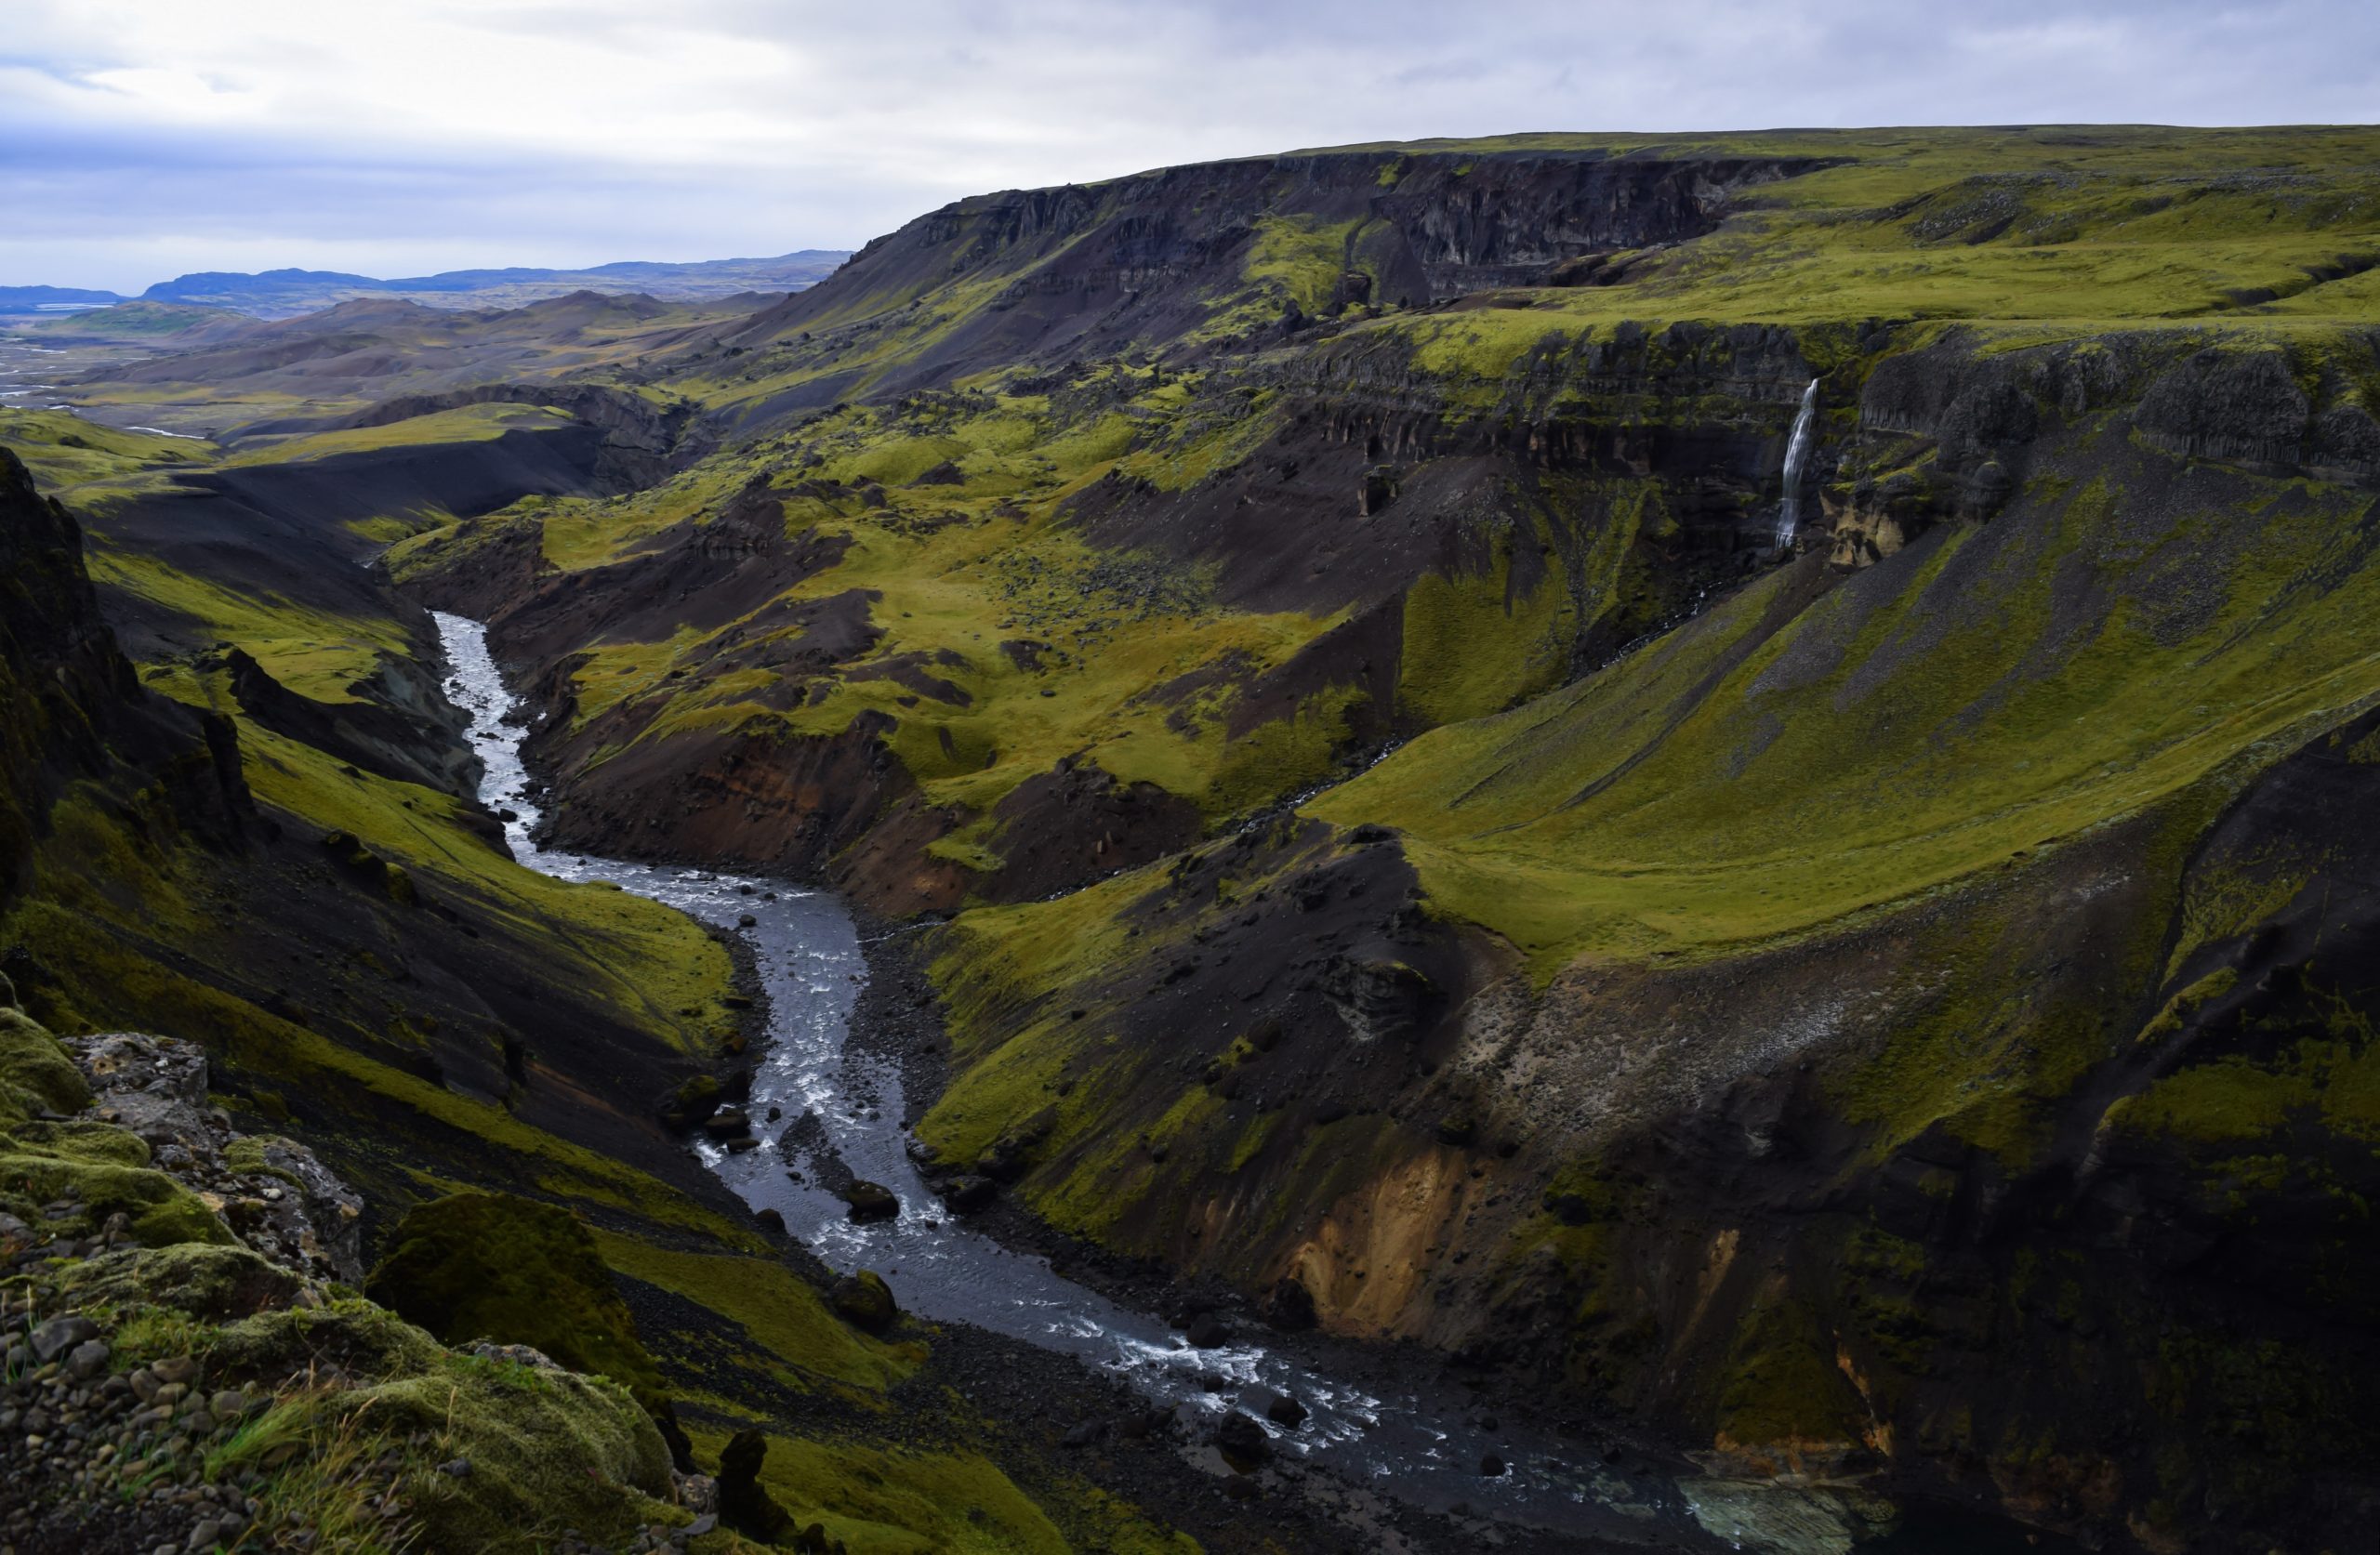 The scenic valley that Haifoss waterfall resides in.